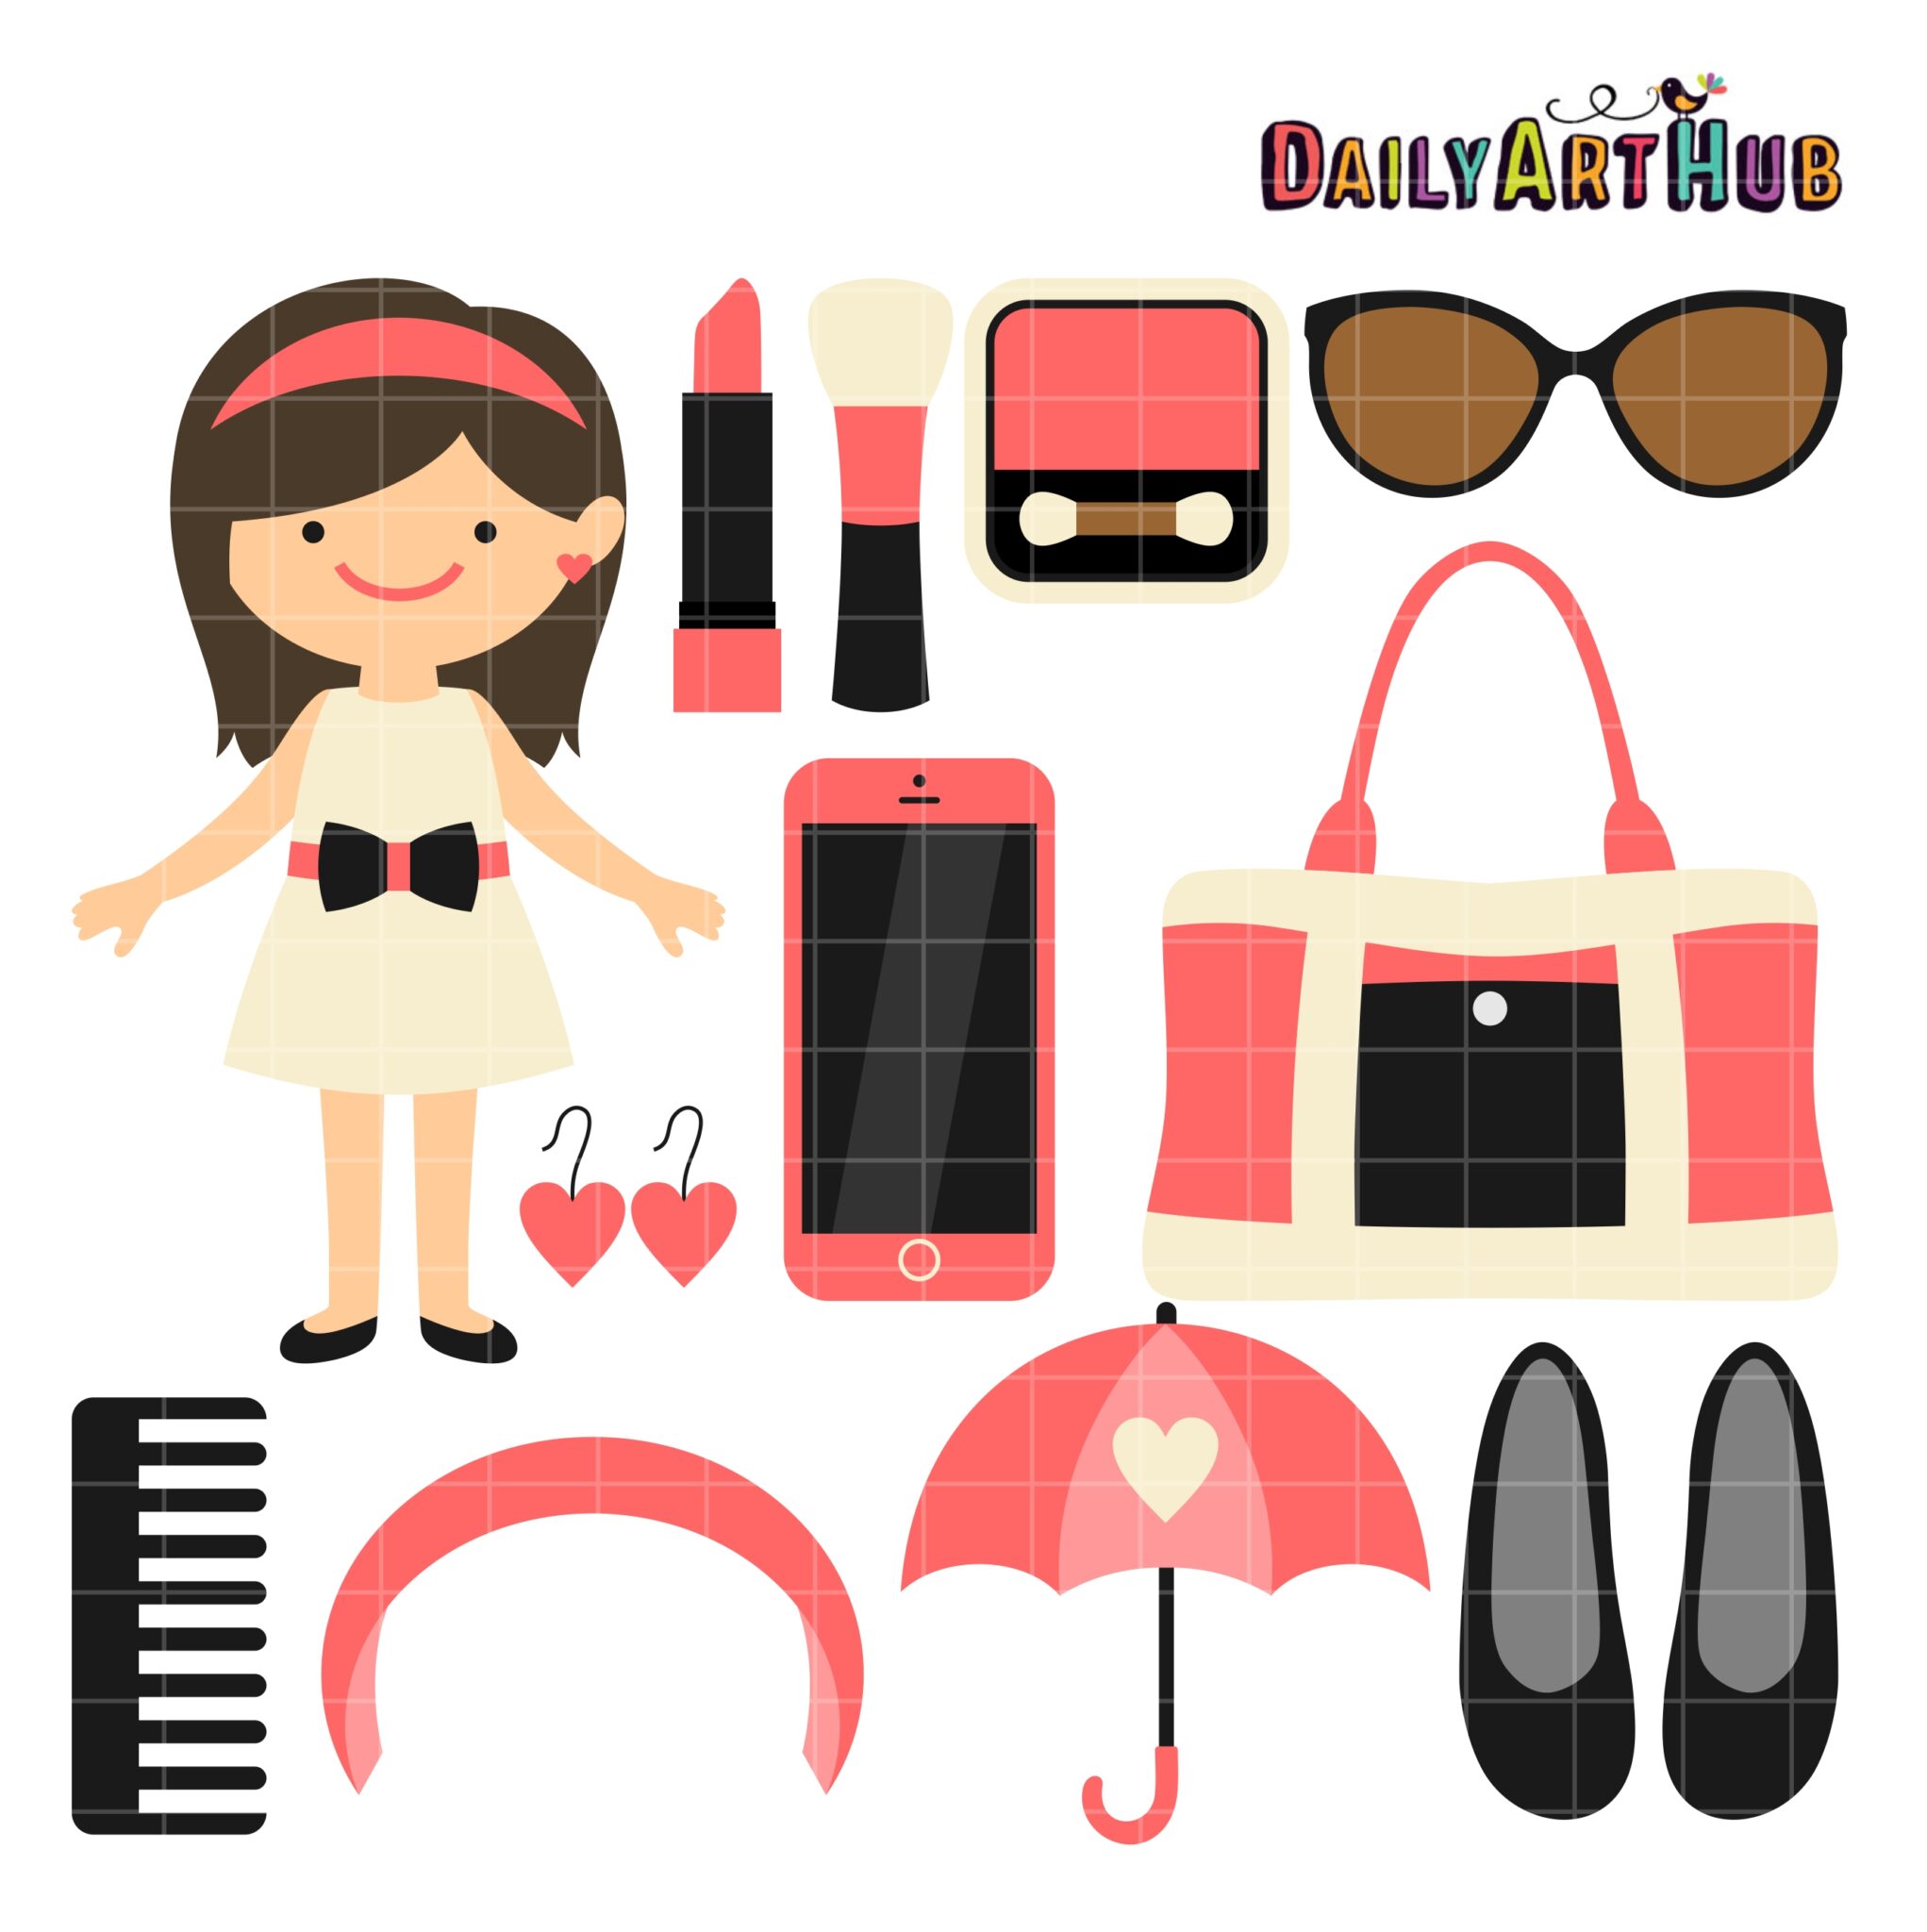 Girly Stuff Clipart Vector Pack, Girly Things, Girly Clipart, Makeup  Clipart, Pretty Things, Planner Girl, Girly Sticker, SVG, PNG file